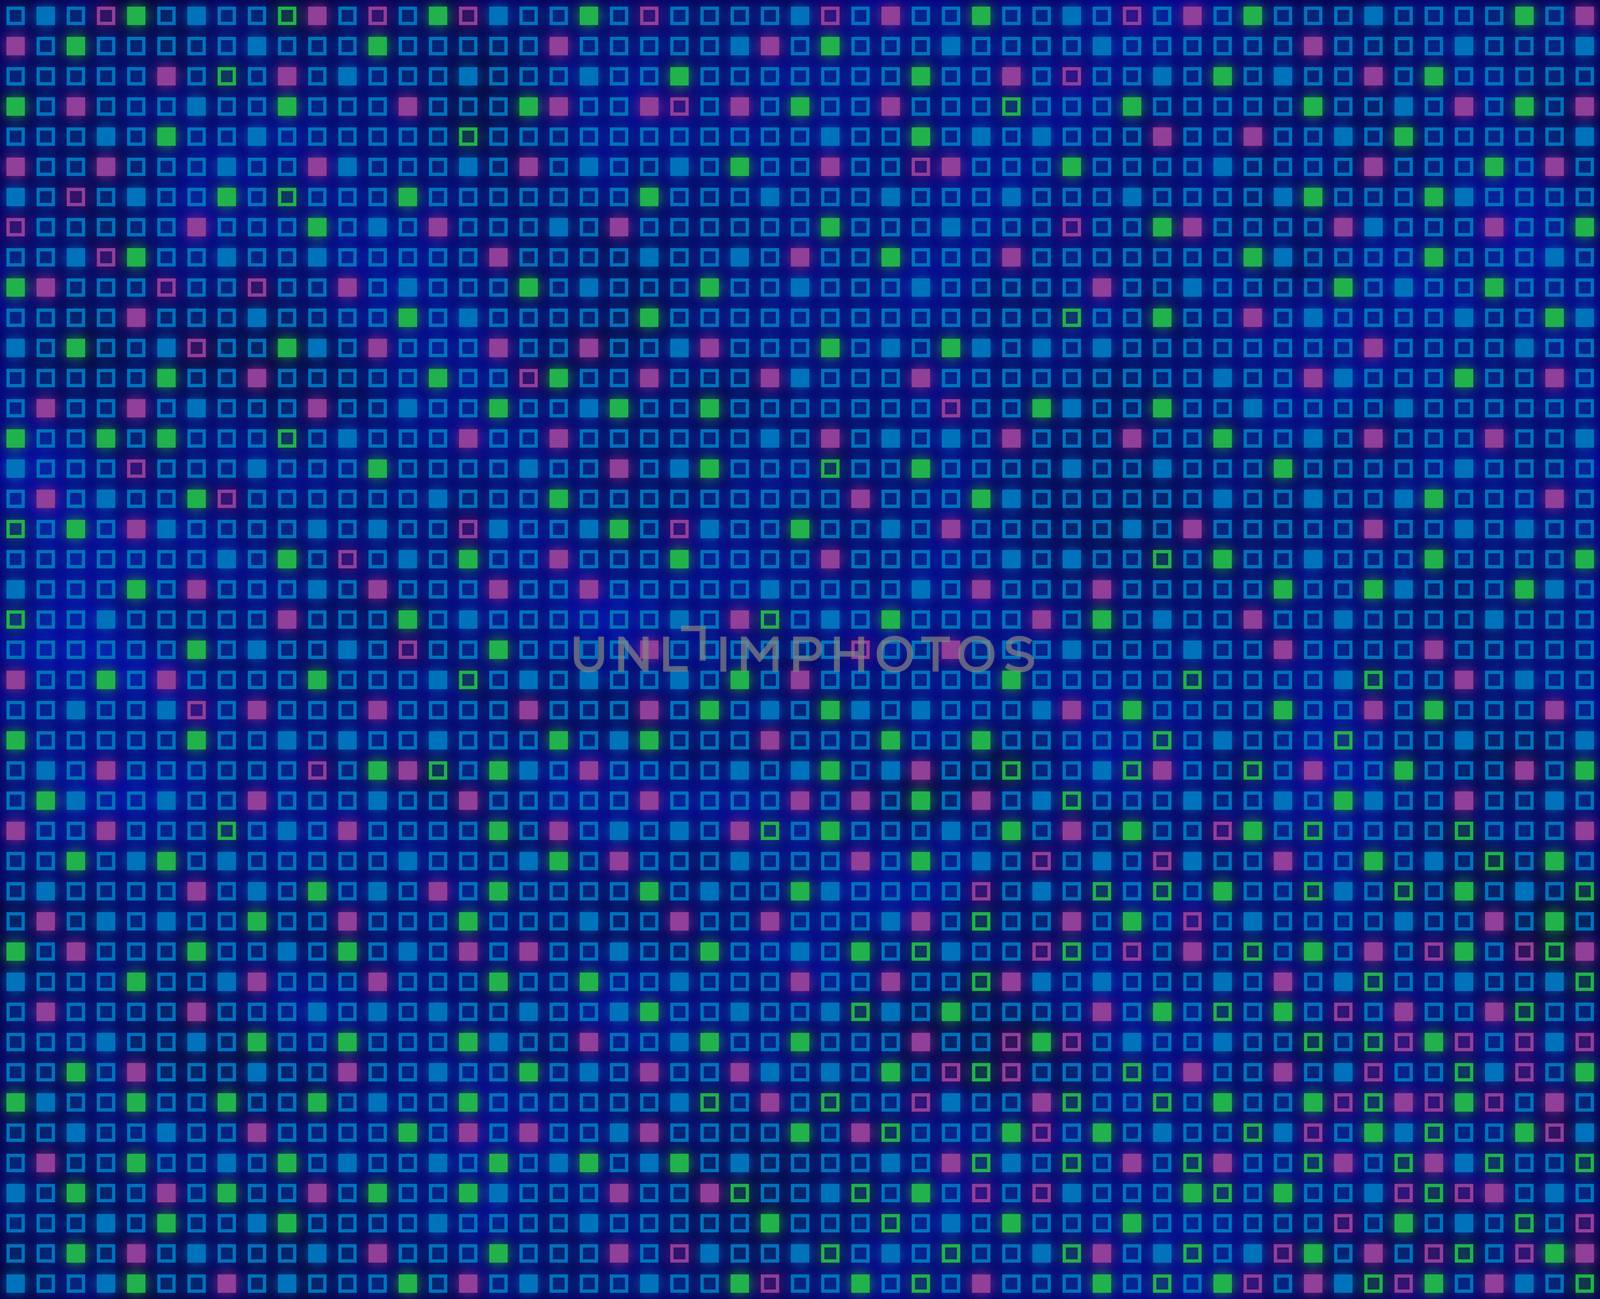 Repeating squares pattern, predominantly blue, seamlessly tileable